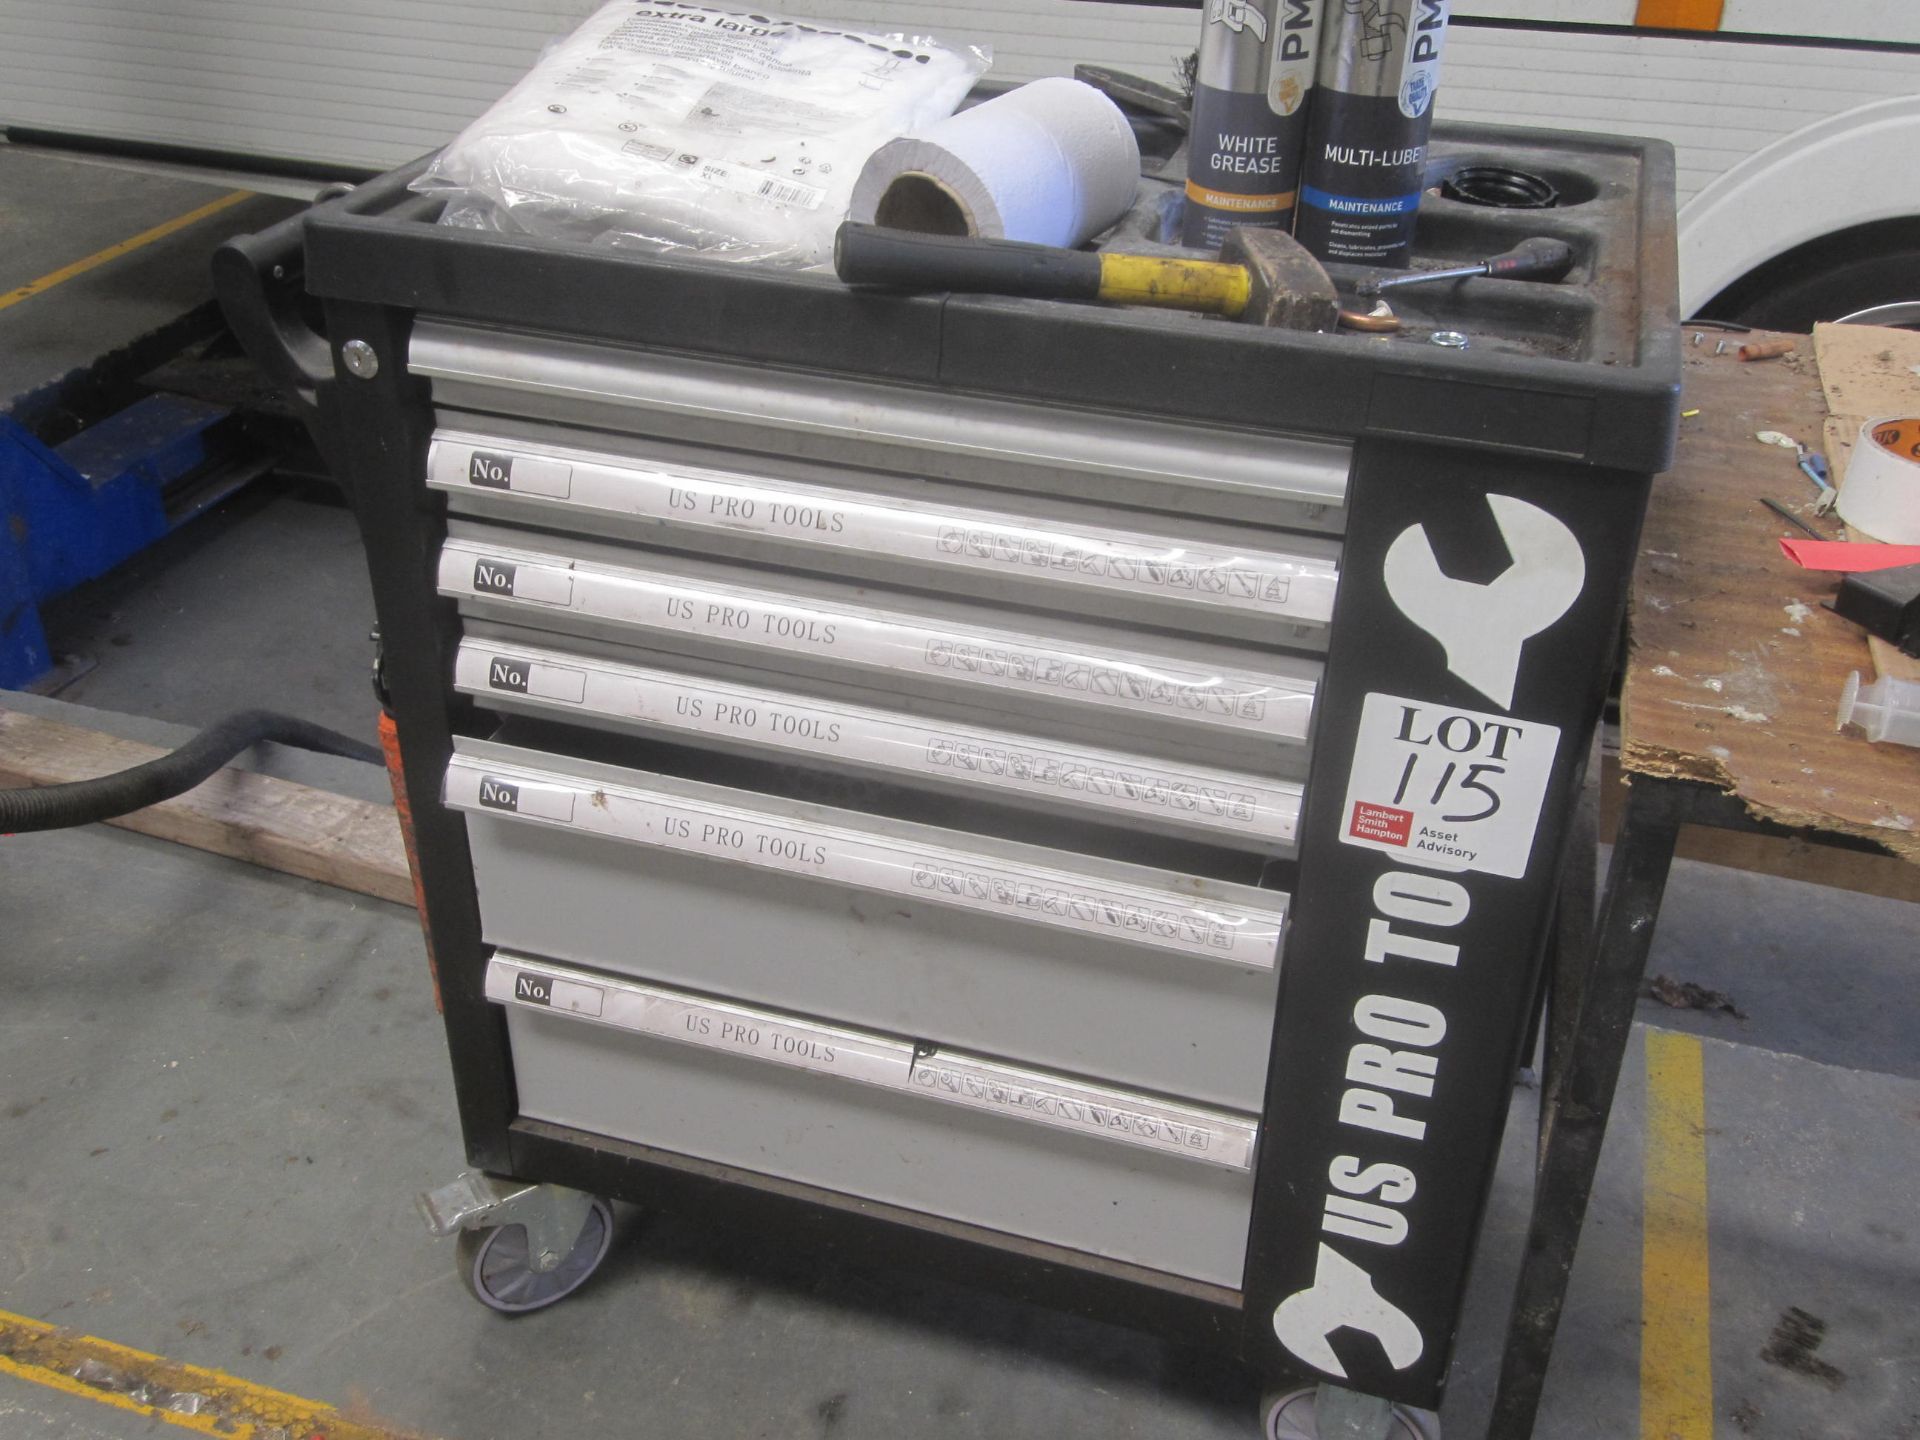 US Pro-Tools mobile tool trolley with contents of tools